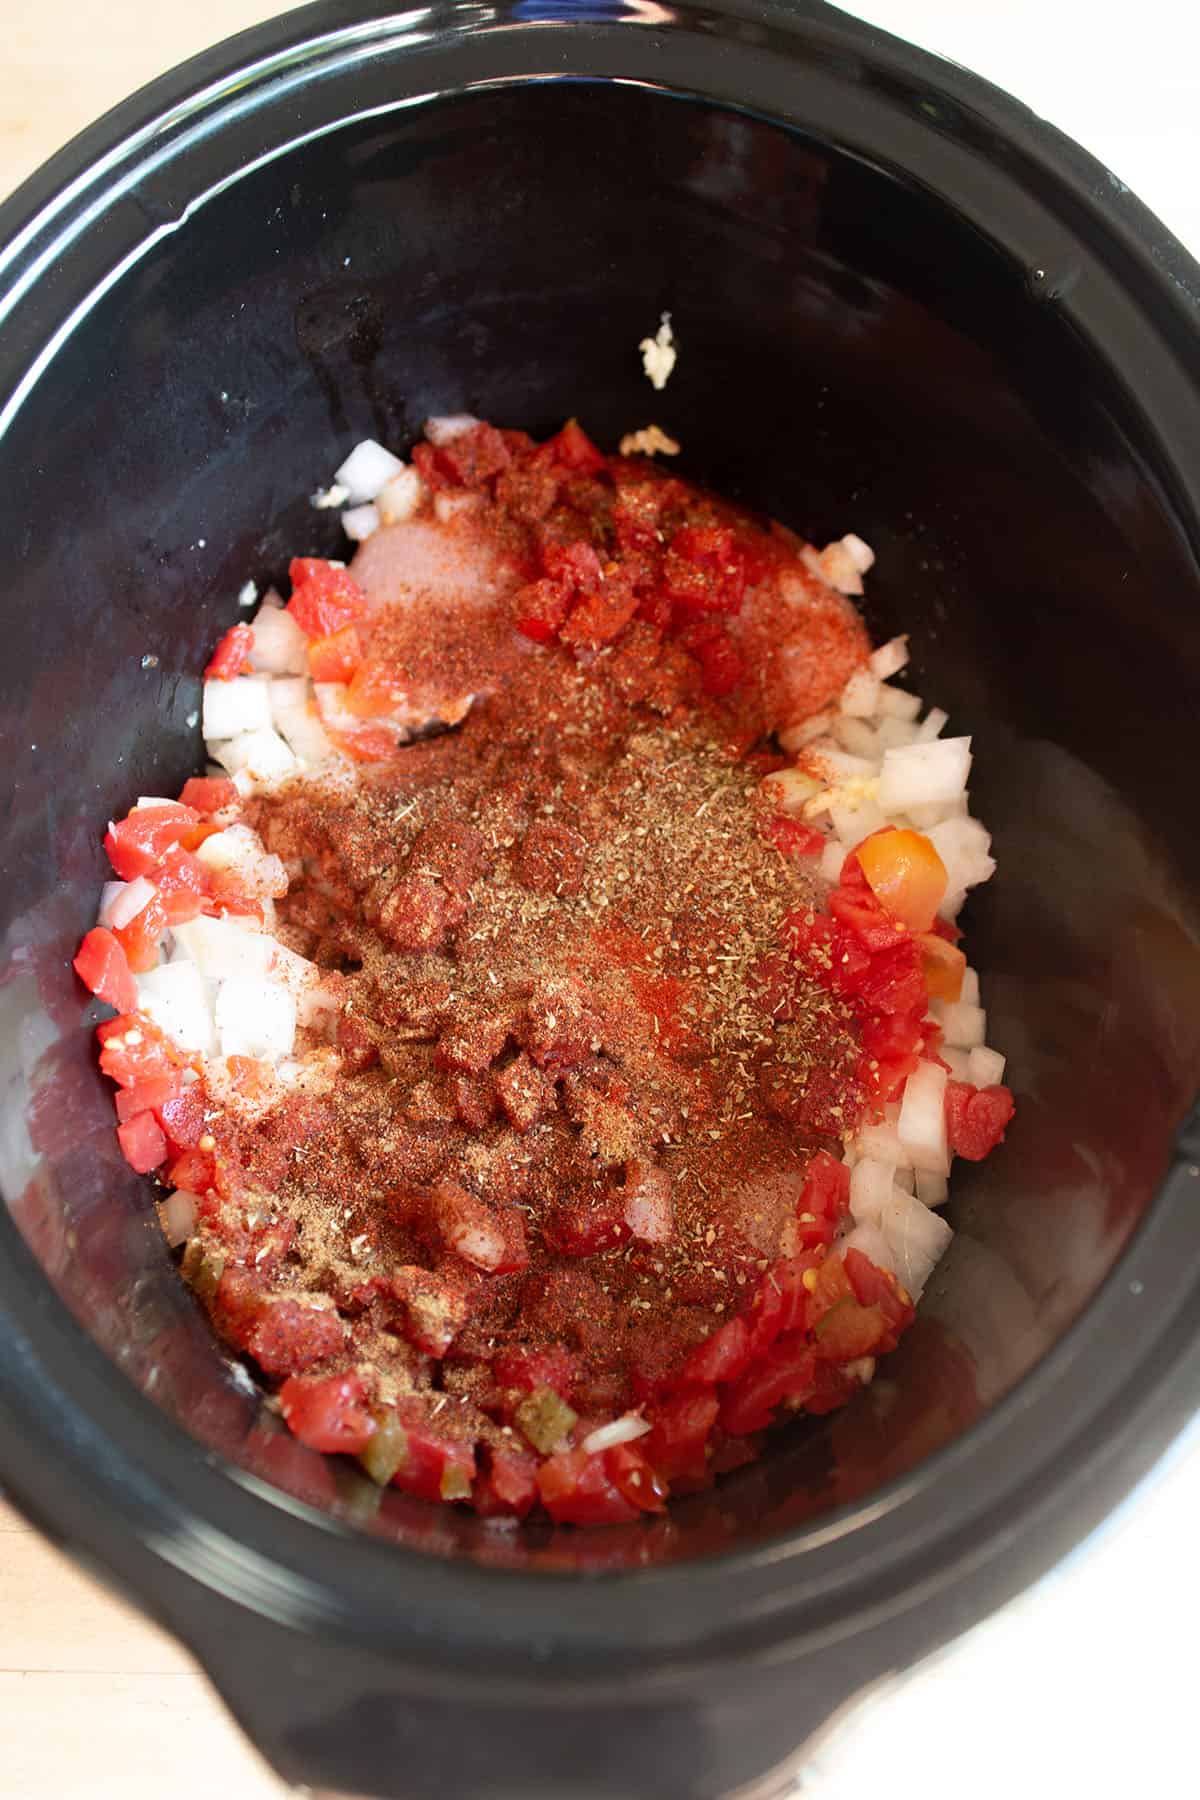 A crockpot full of raw chicken, onions, diced onions and spices.